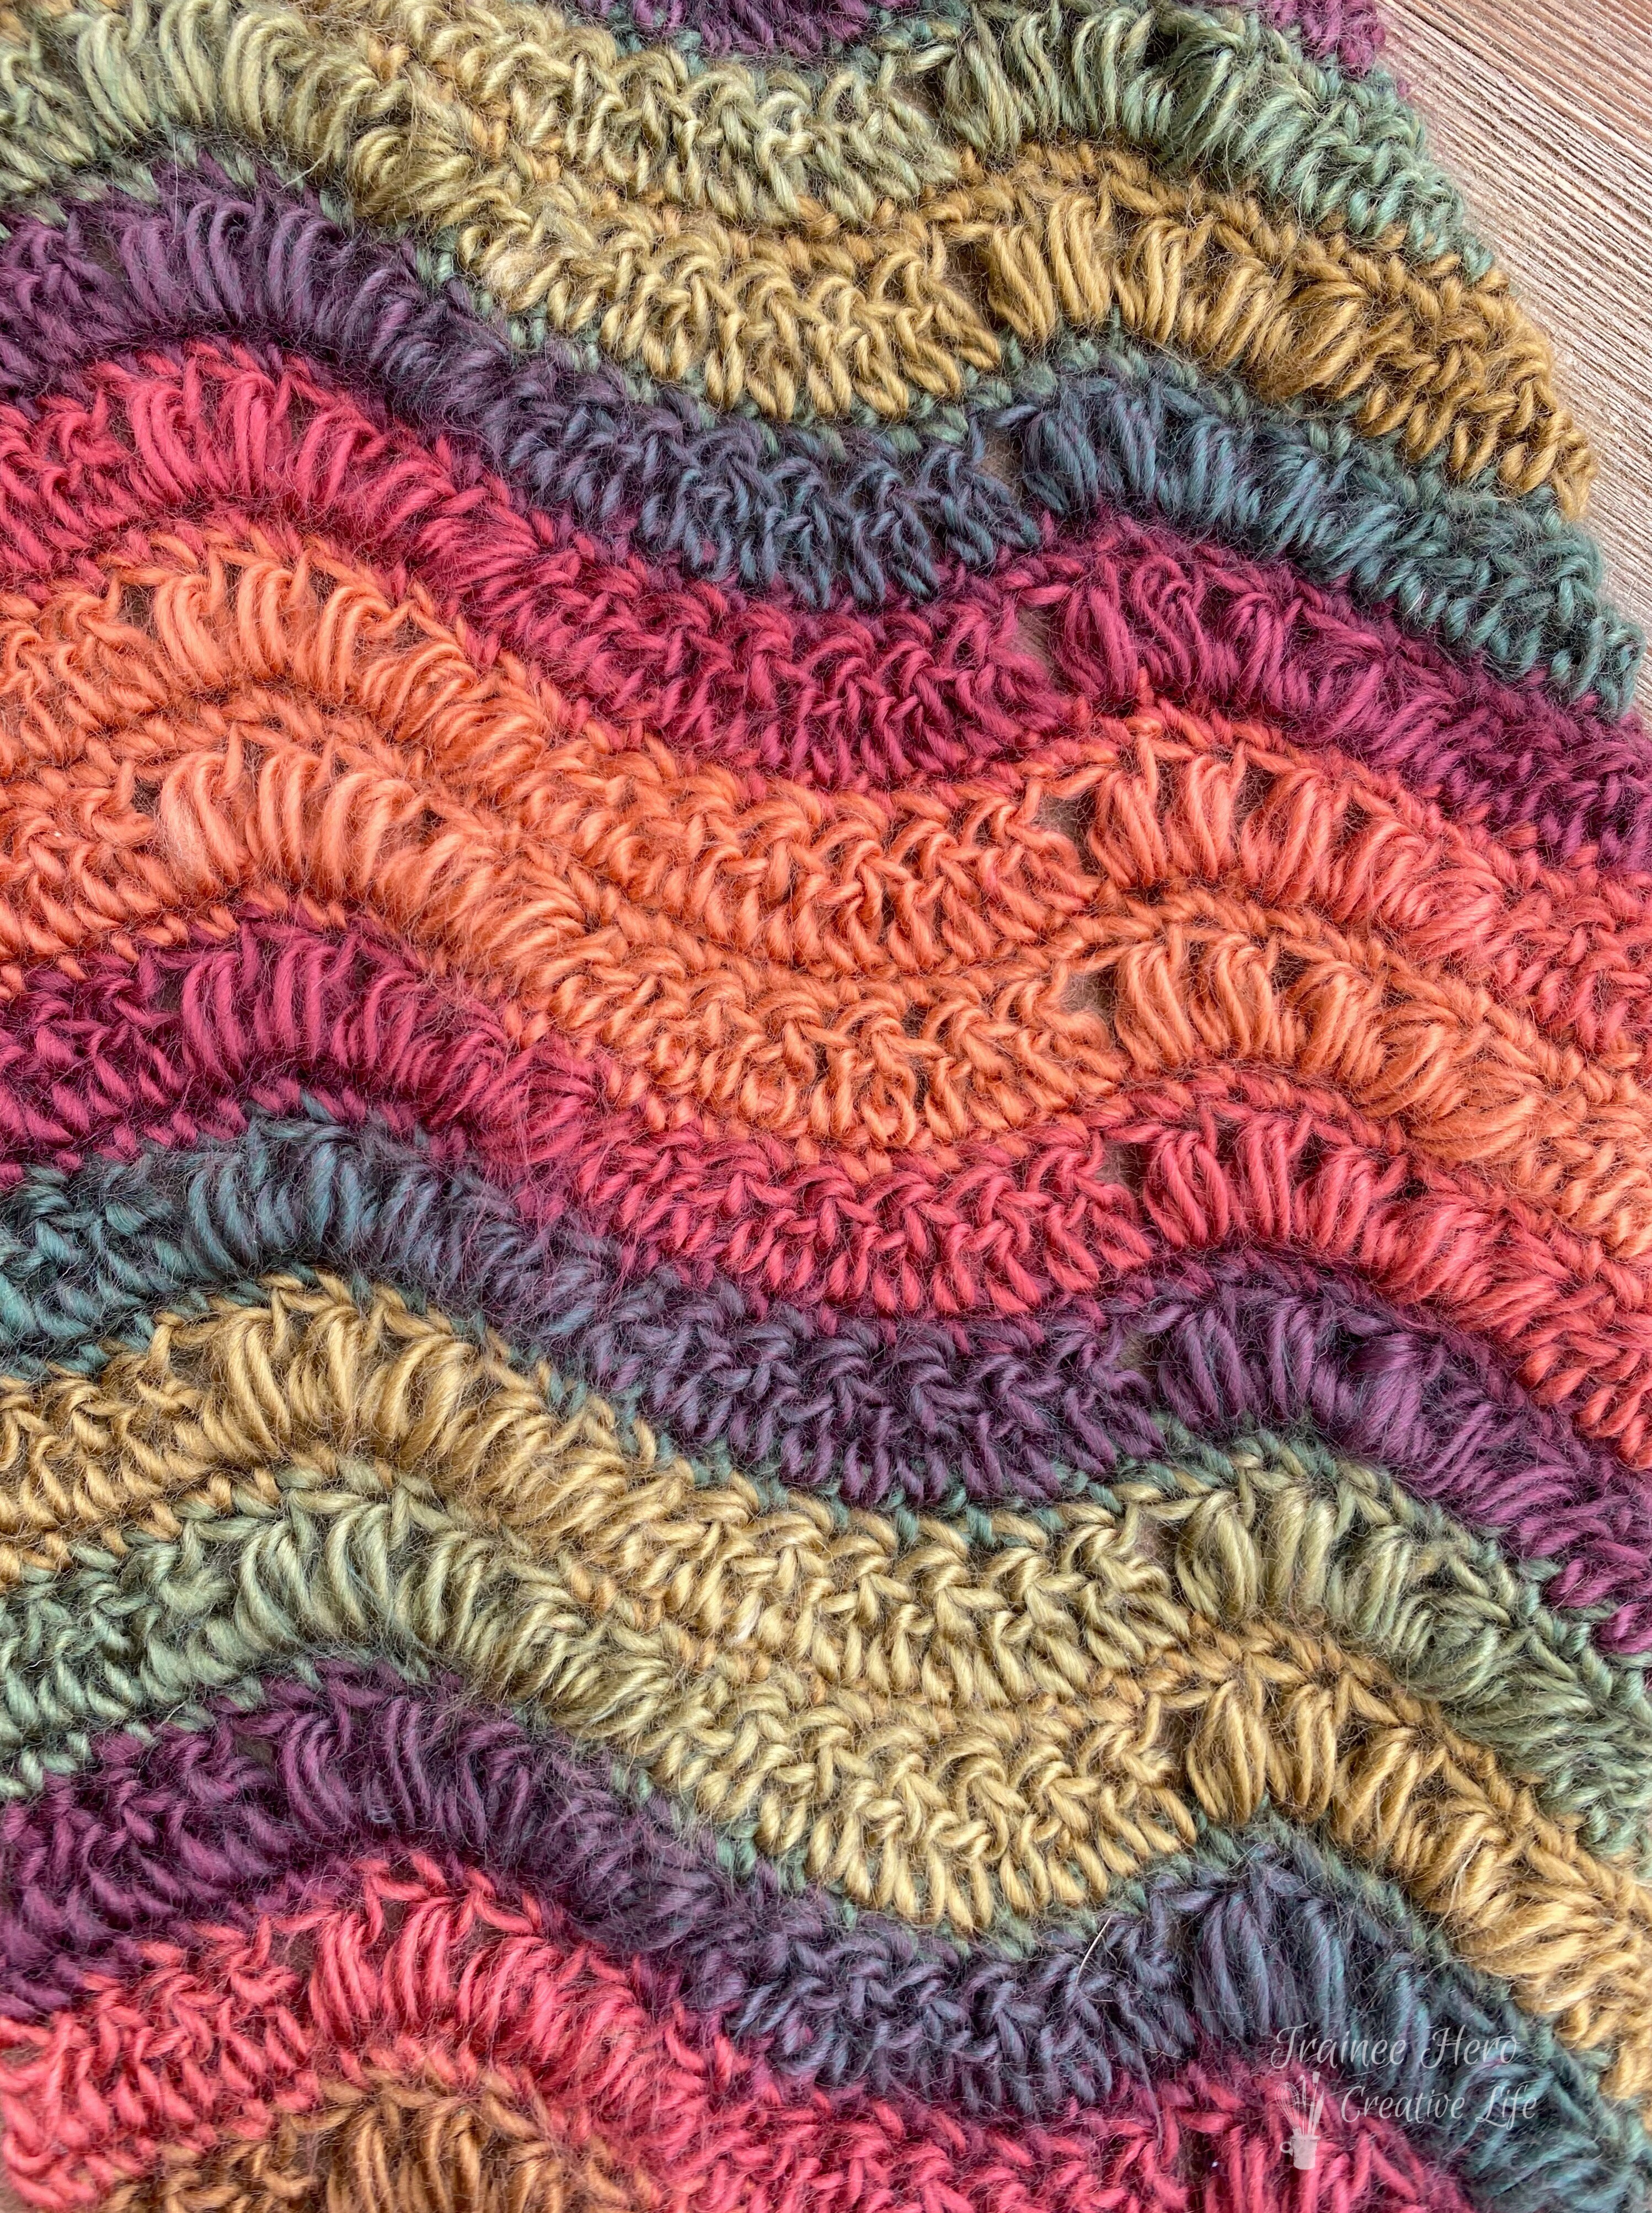 Up close view of the puffed waves stitches